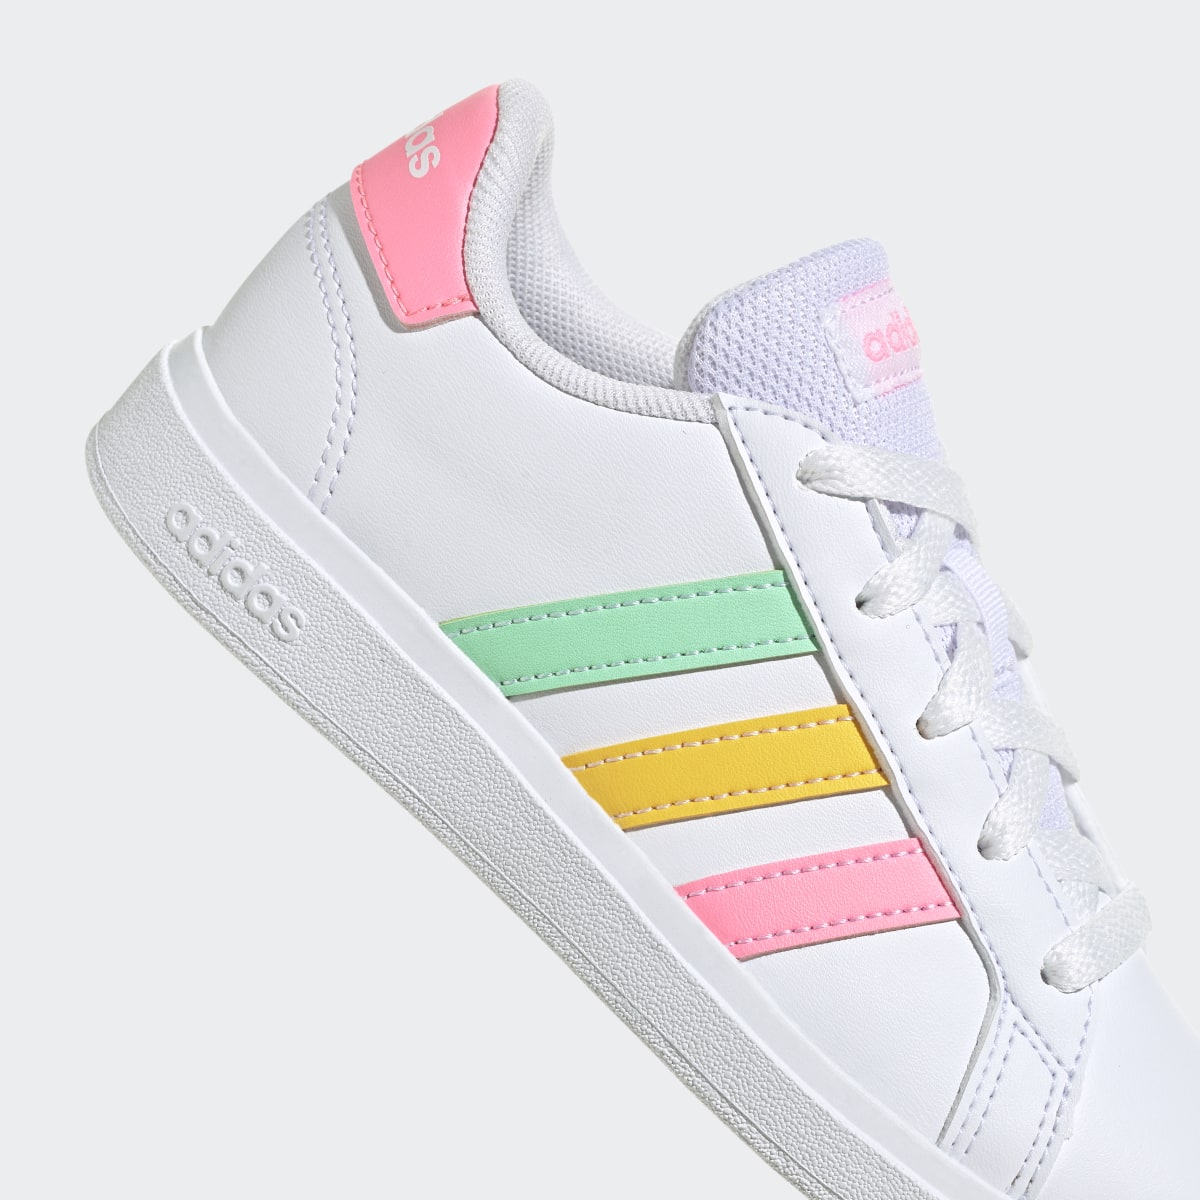 Adidas Grand Court Lifestyle Tennis Lace-Up Shoes. 9